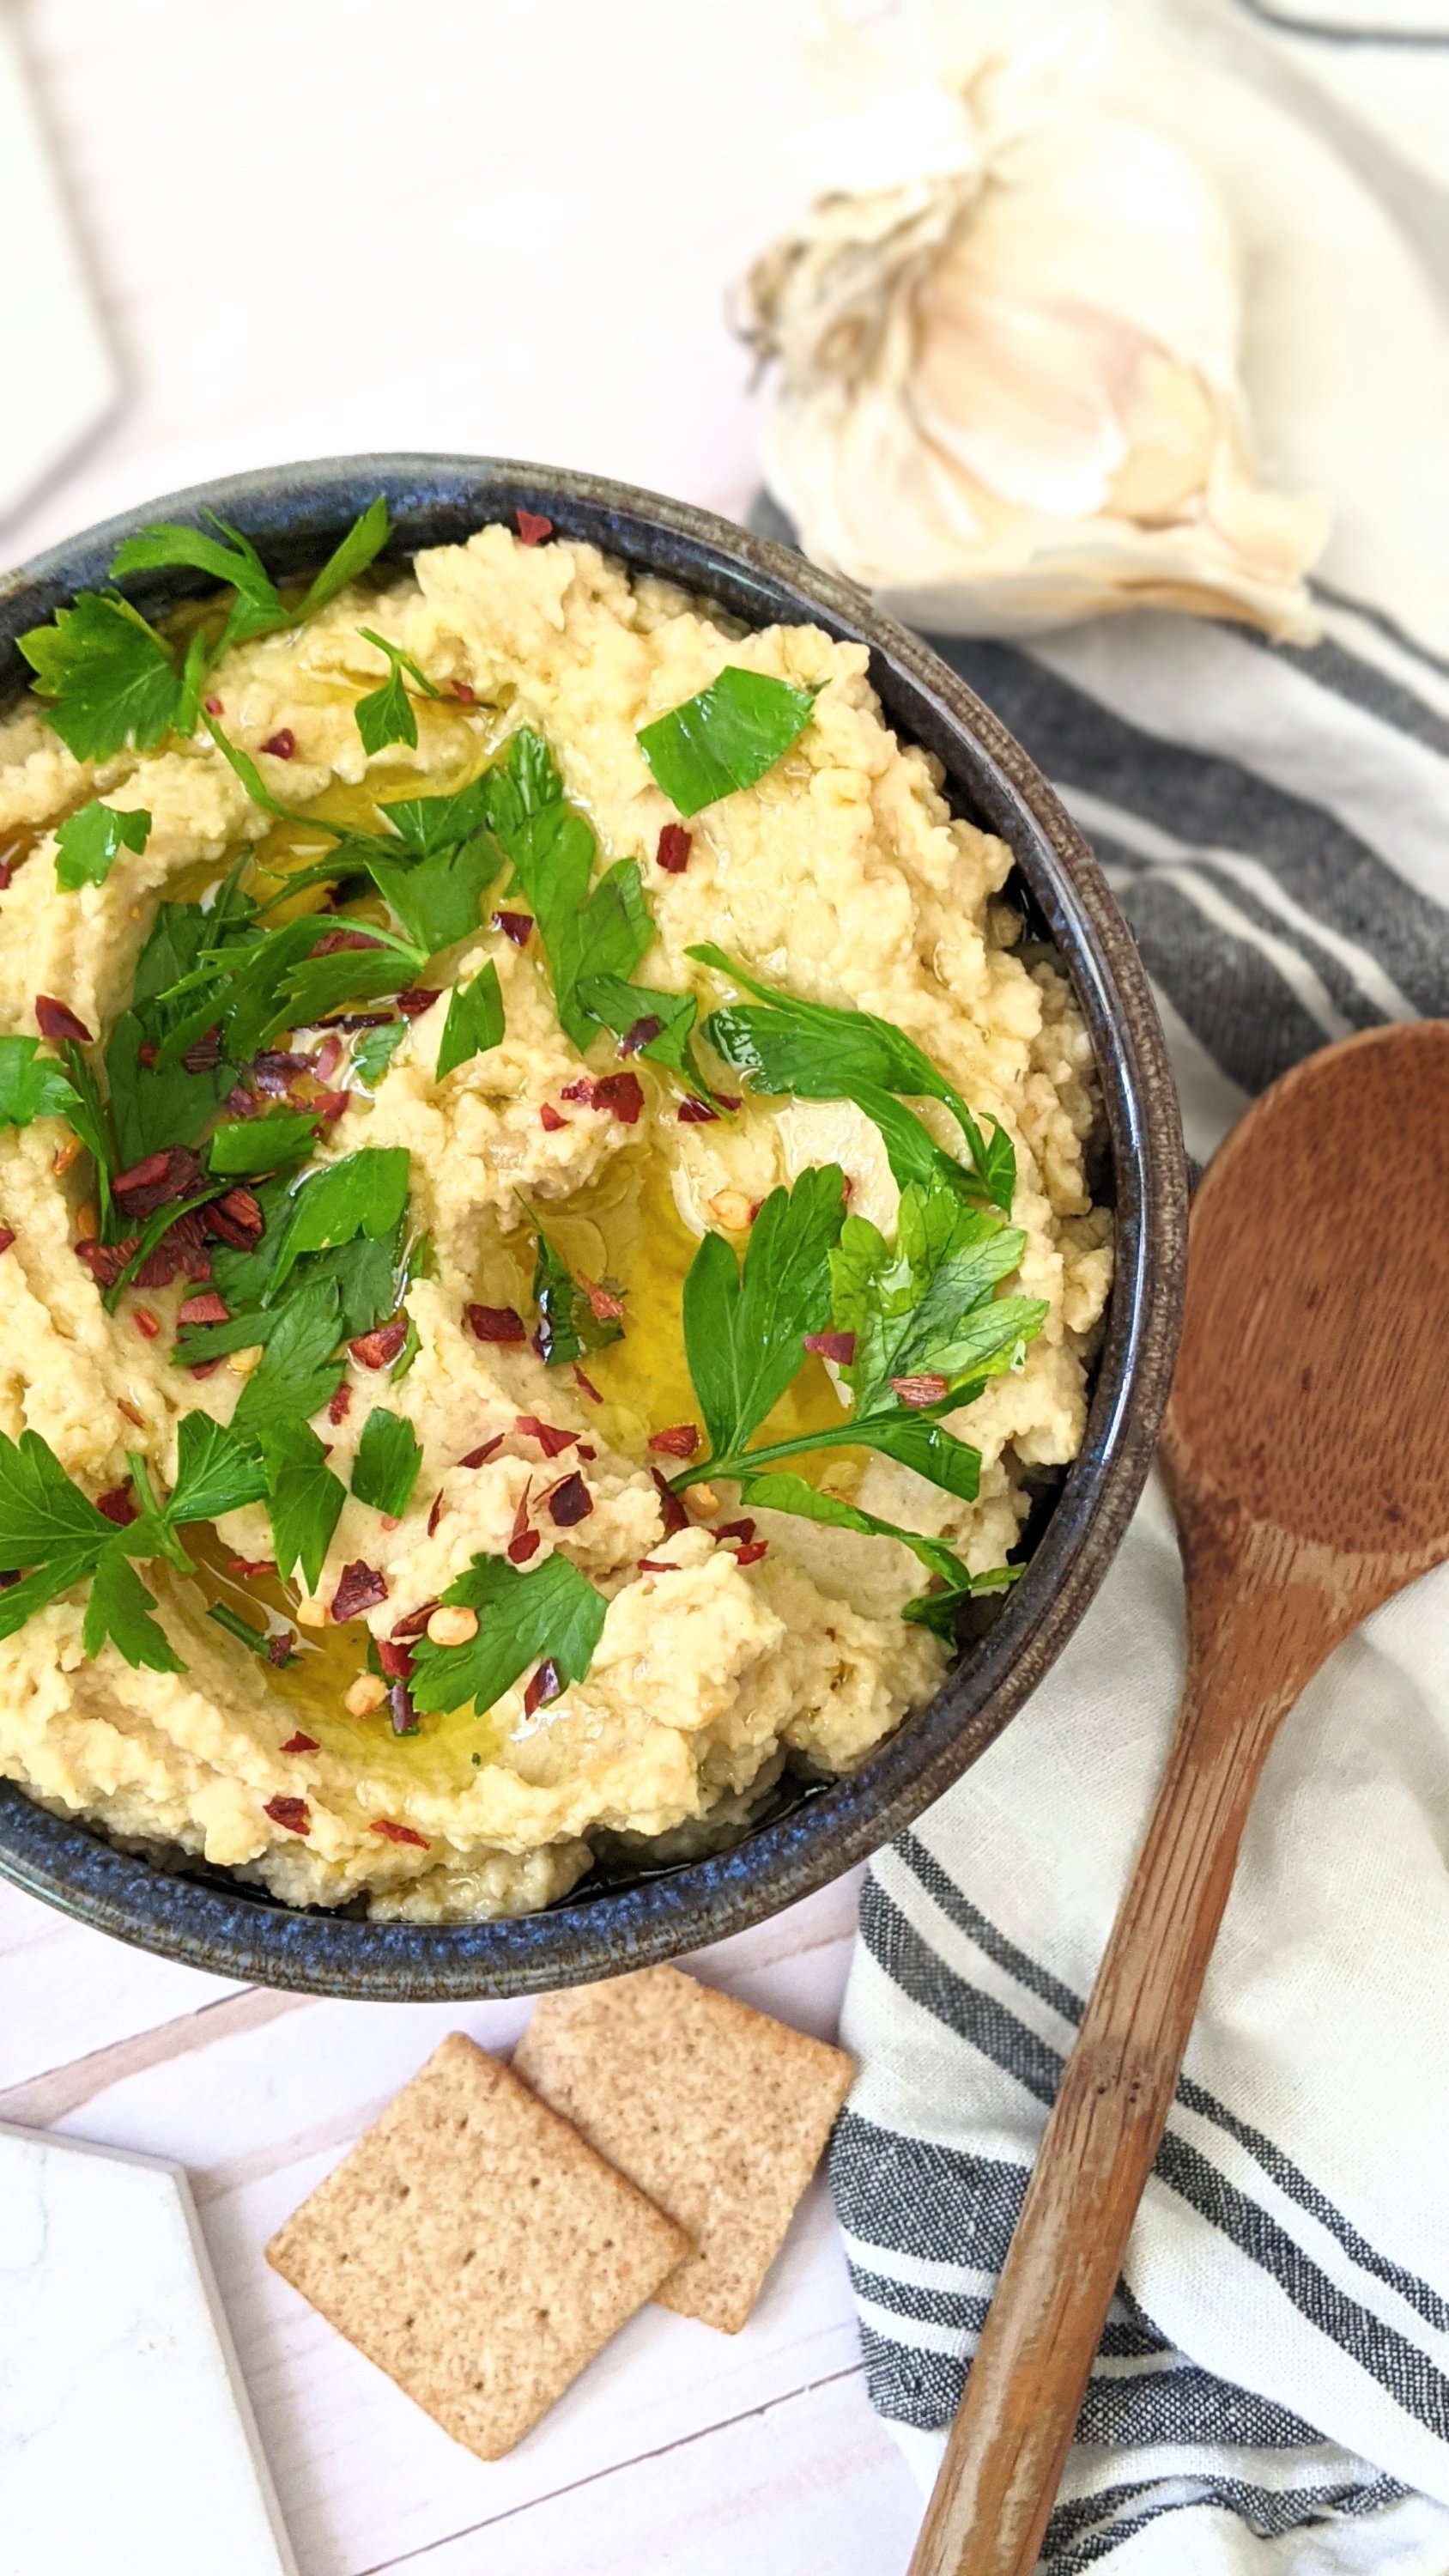 garlic hummus recipe with tahini recipes no cook snacks and appetizers for summer party gluten free plant based healthy recipes without cooking vegetarian and vegan recipes in food processor or blender recipes vegan